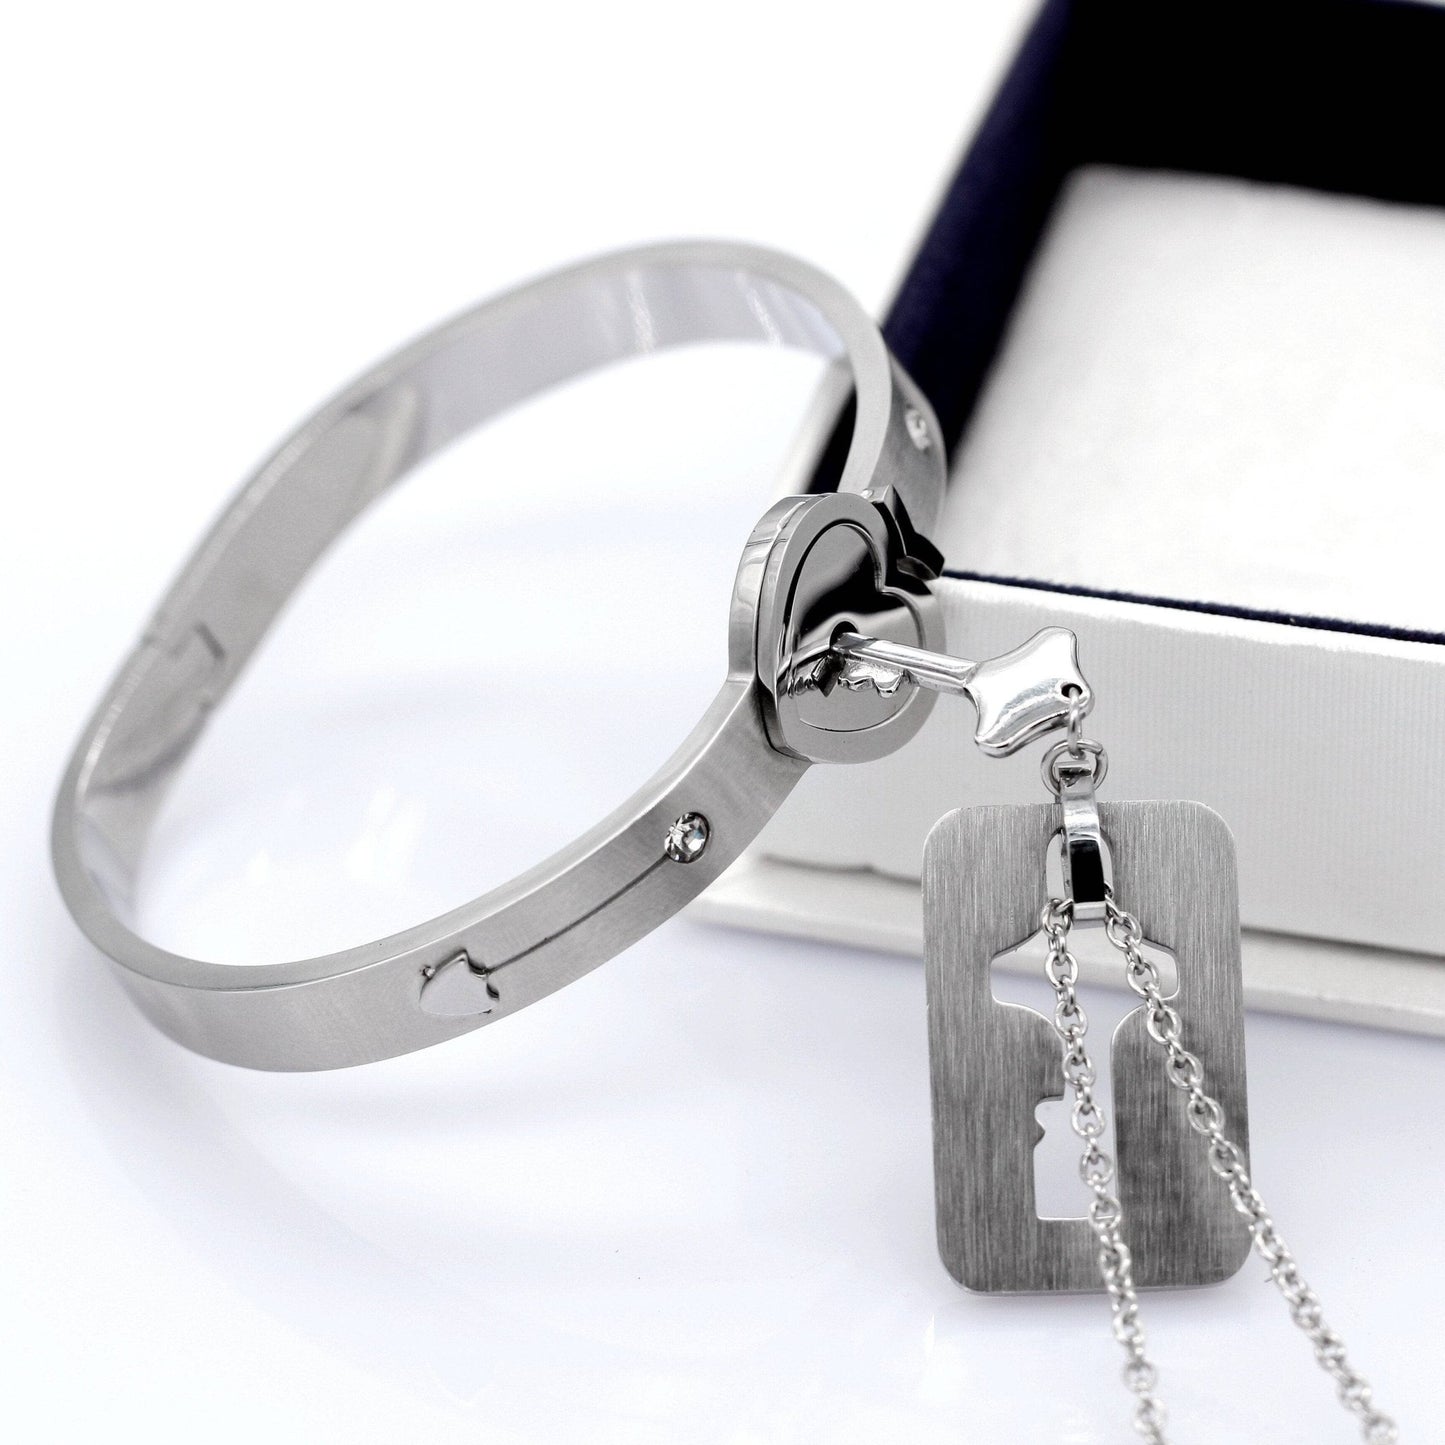 Stainless Steel Lock and Key Necklace and Bracelet For Couple's-Black Diamonds New York